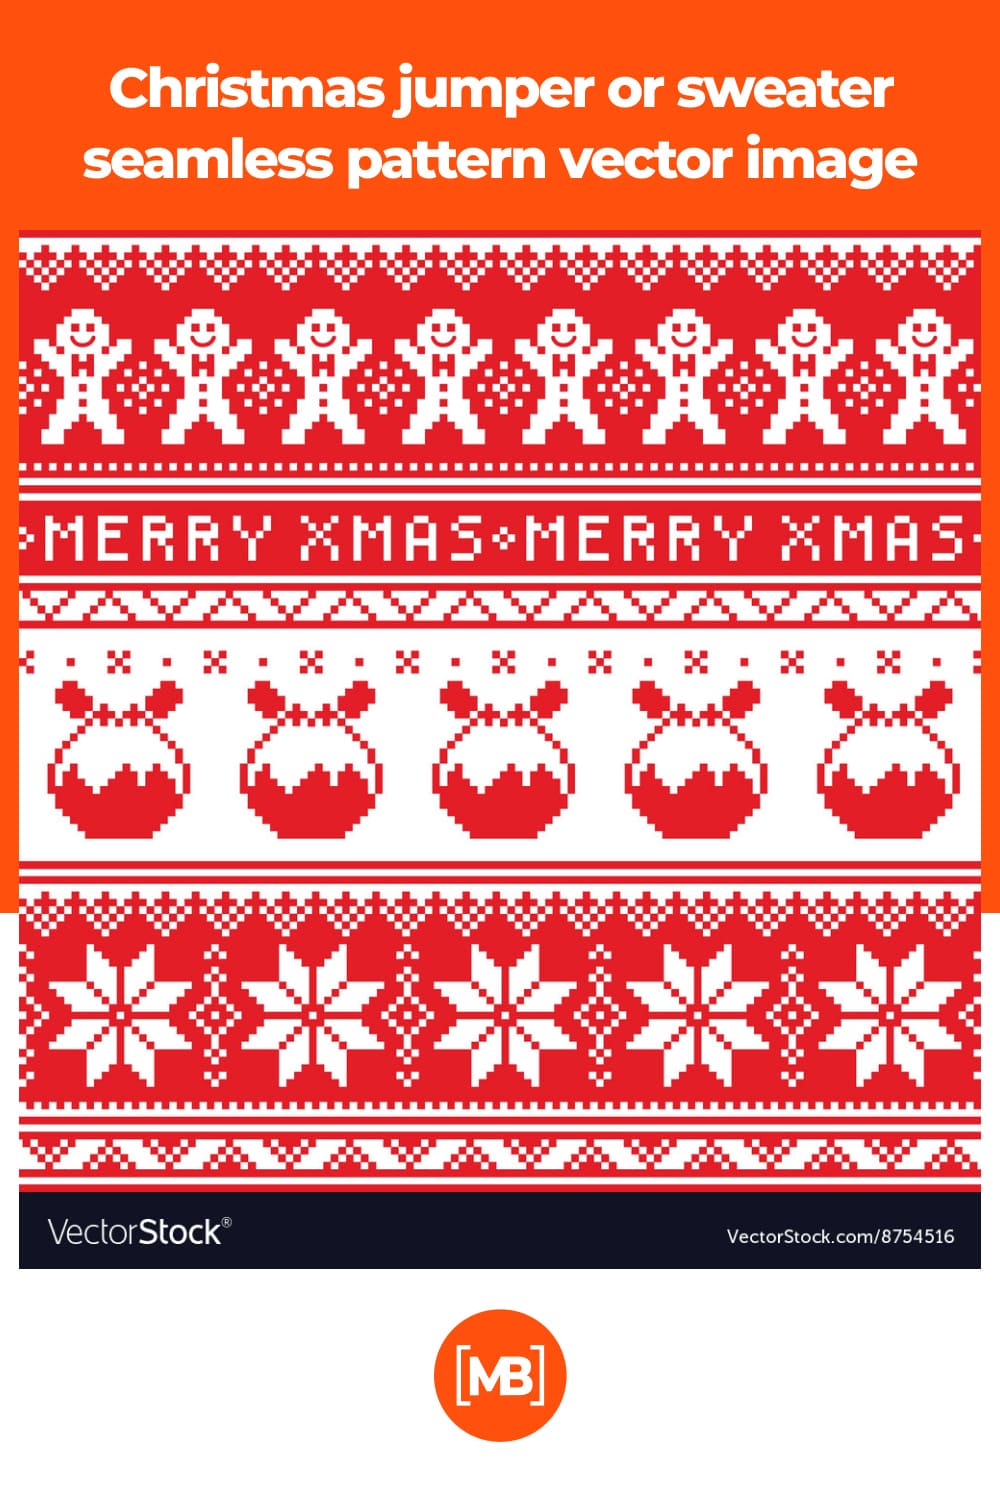 The most primitive Christmas print in red with funny snowmen and snowflakes.